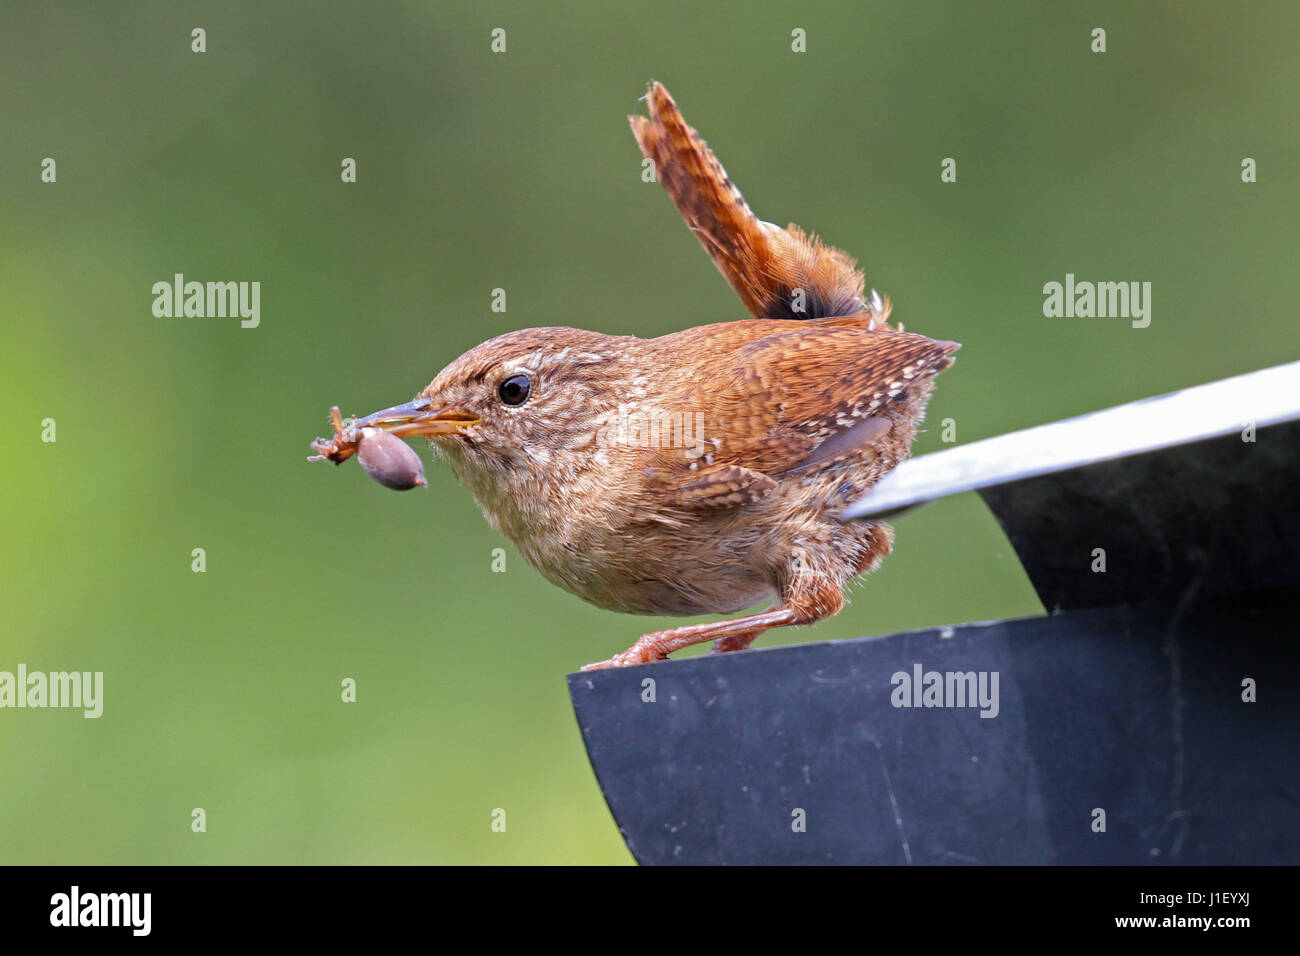 Adult eurasian wren carrying insect to feed young Stock Photo